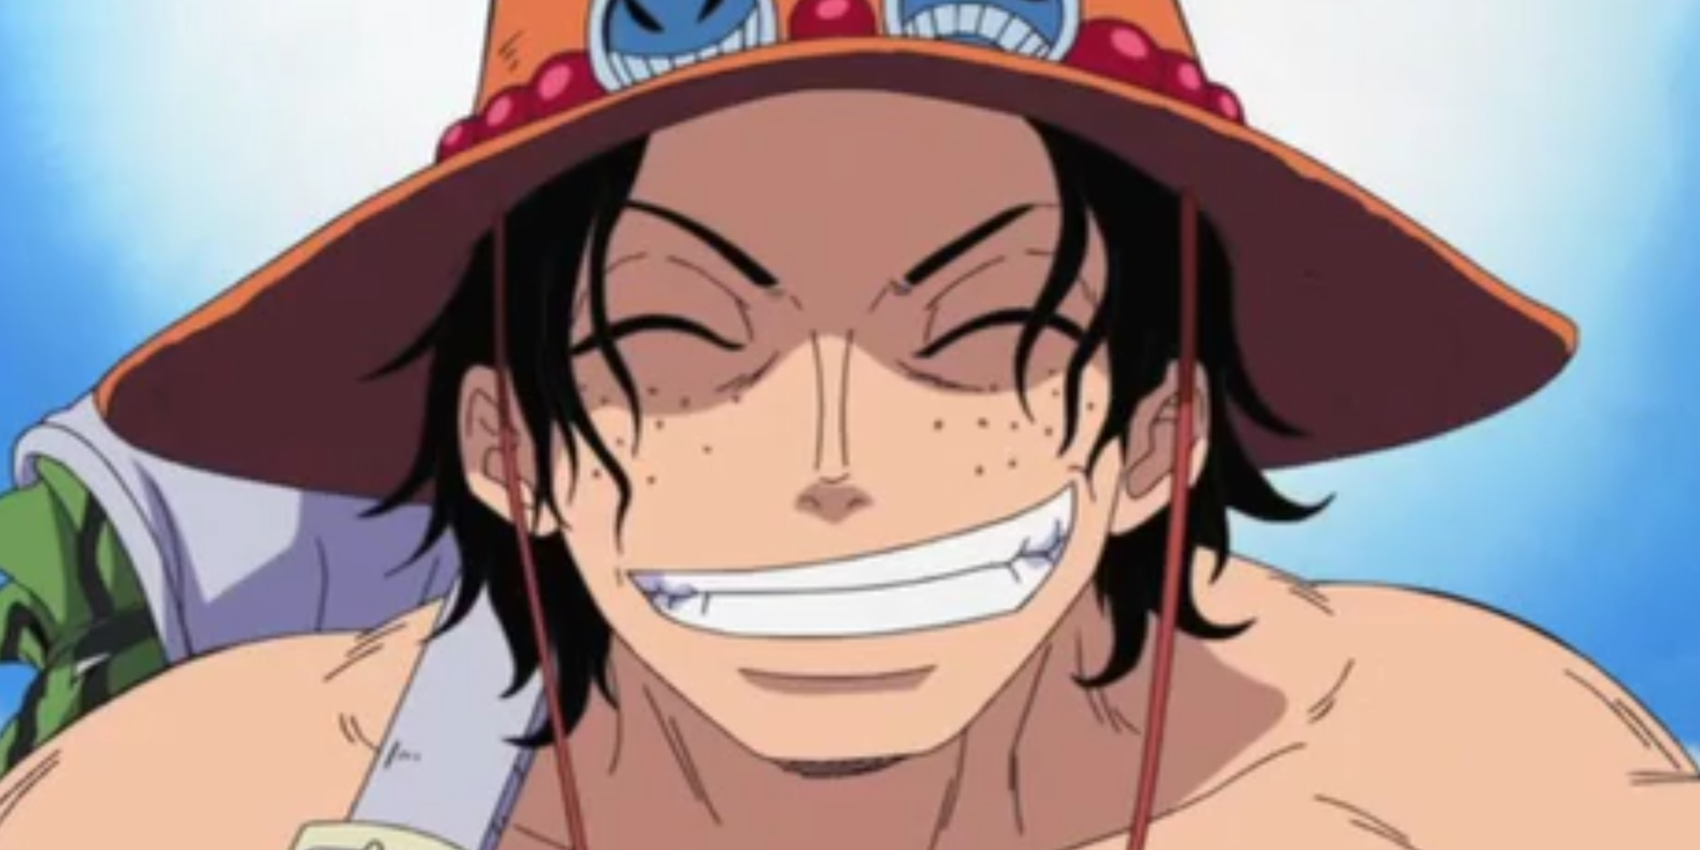 Ace grinning in the One Piece anime